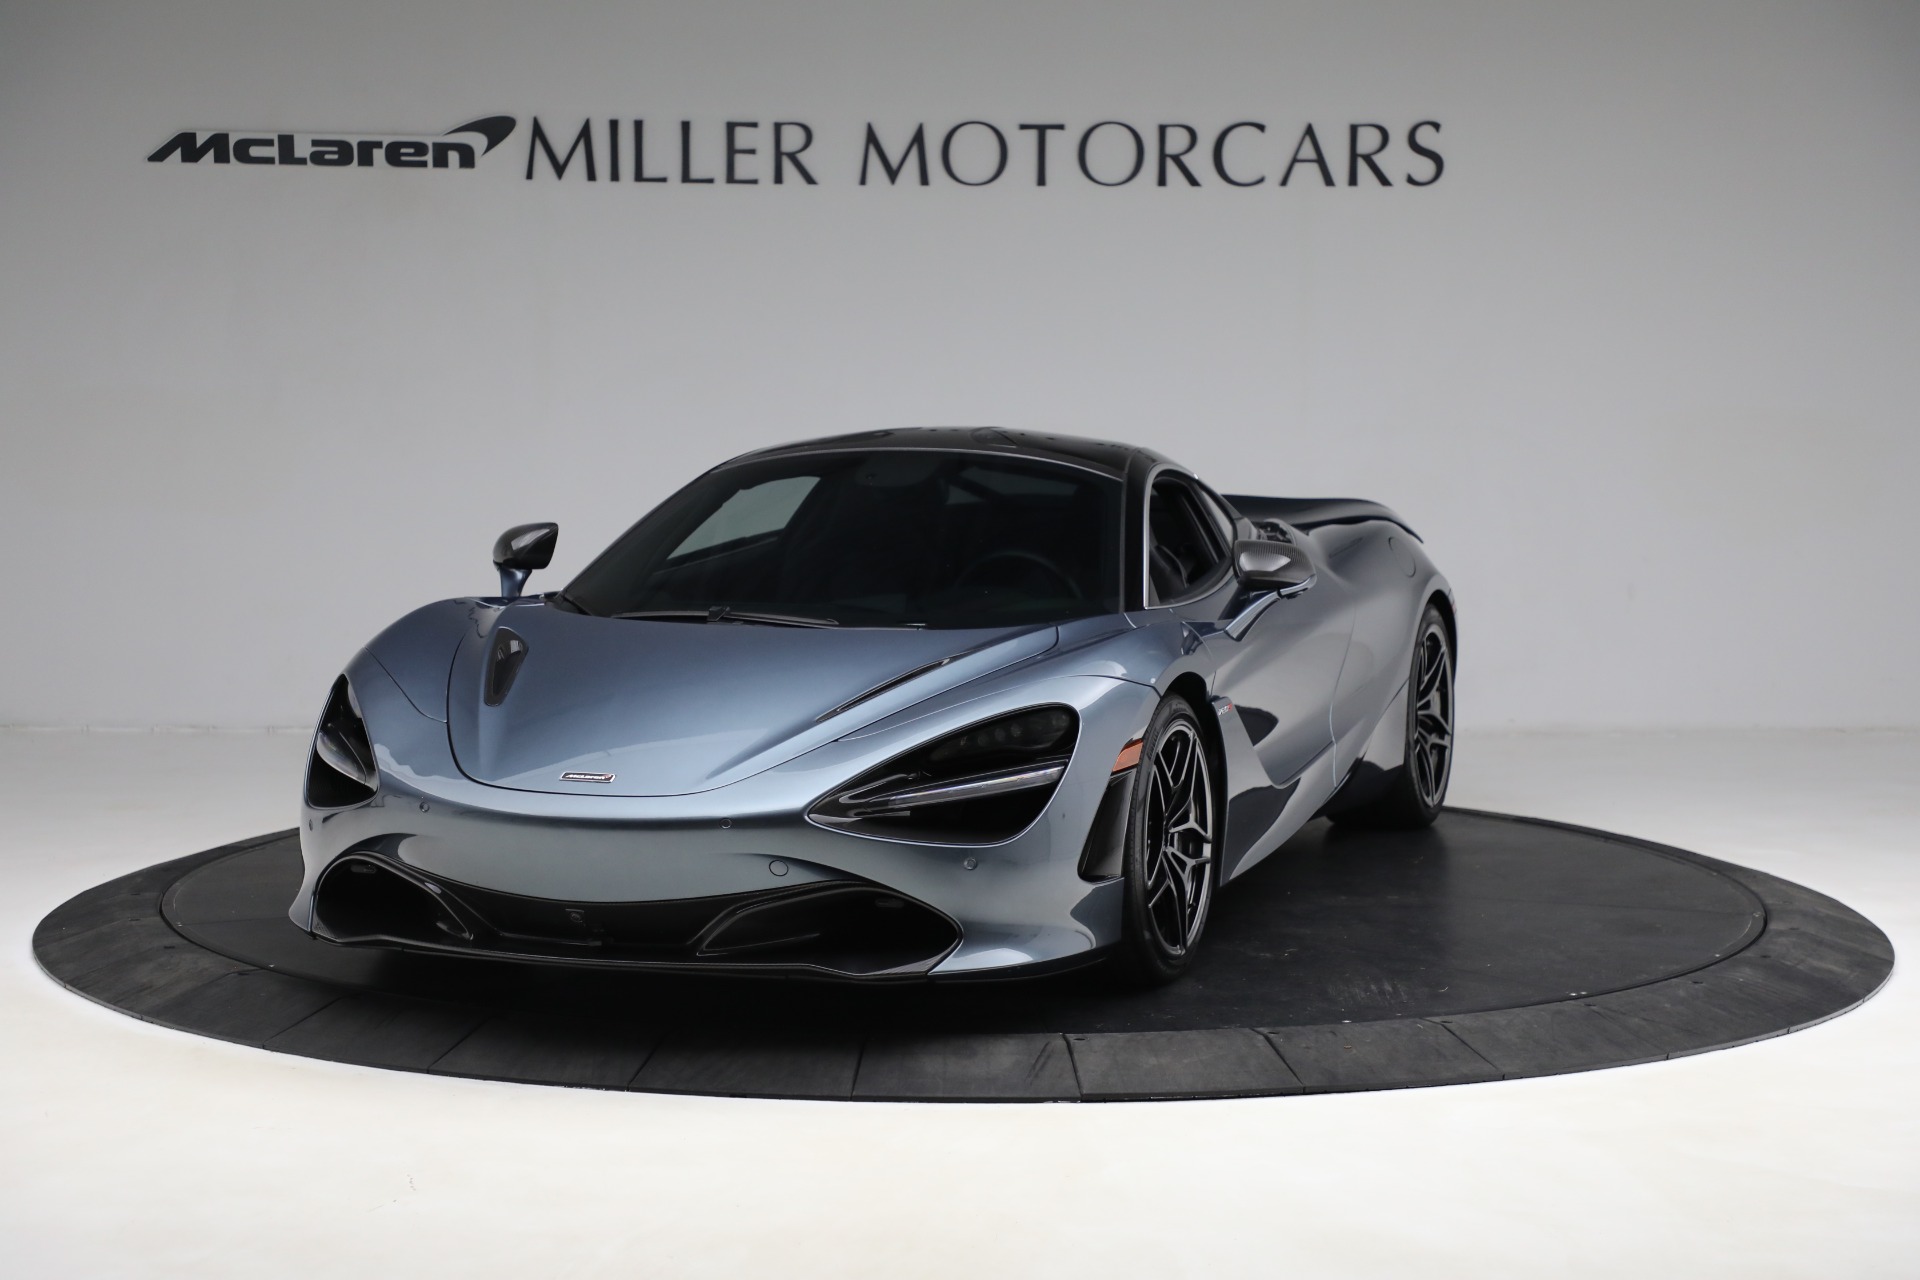 Used 2018 McLaren 720S Luxury for sale $249,900 at McLaren Greenwich in Greenwich CT 06830 1